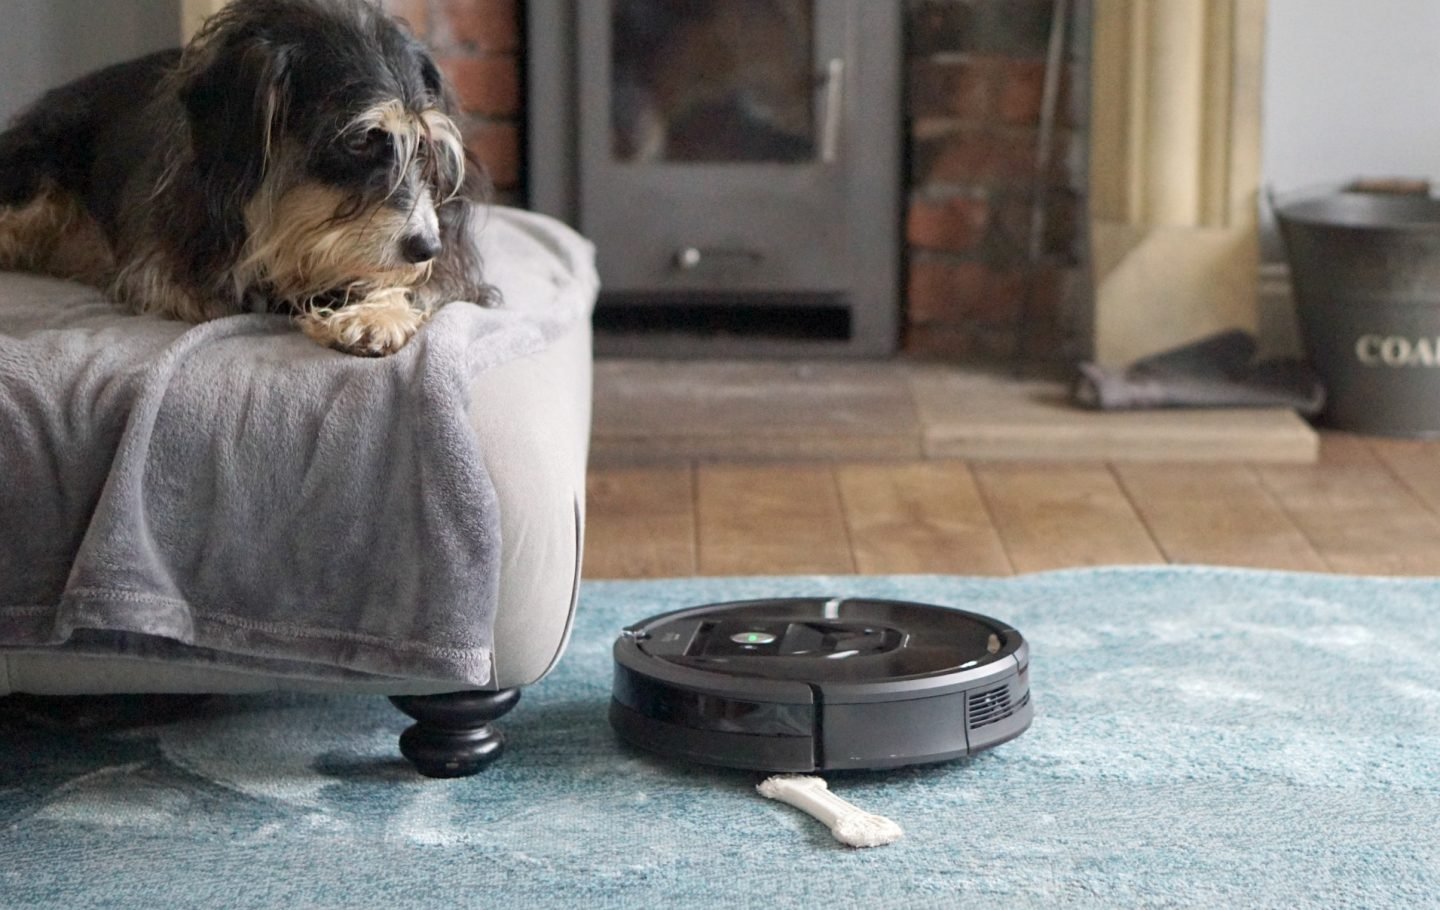 The Roomba can adjust between wood floors and rugs seamlessly 